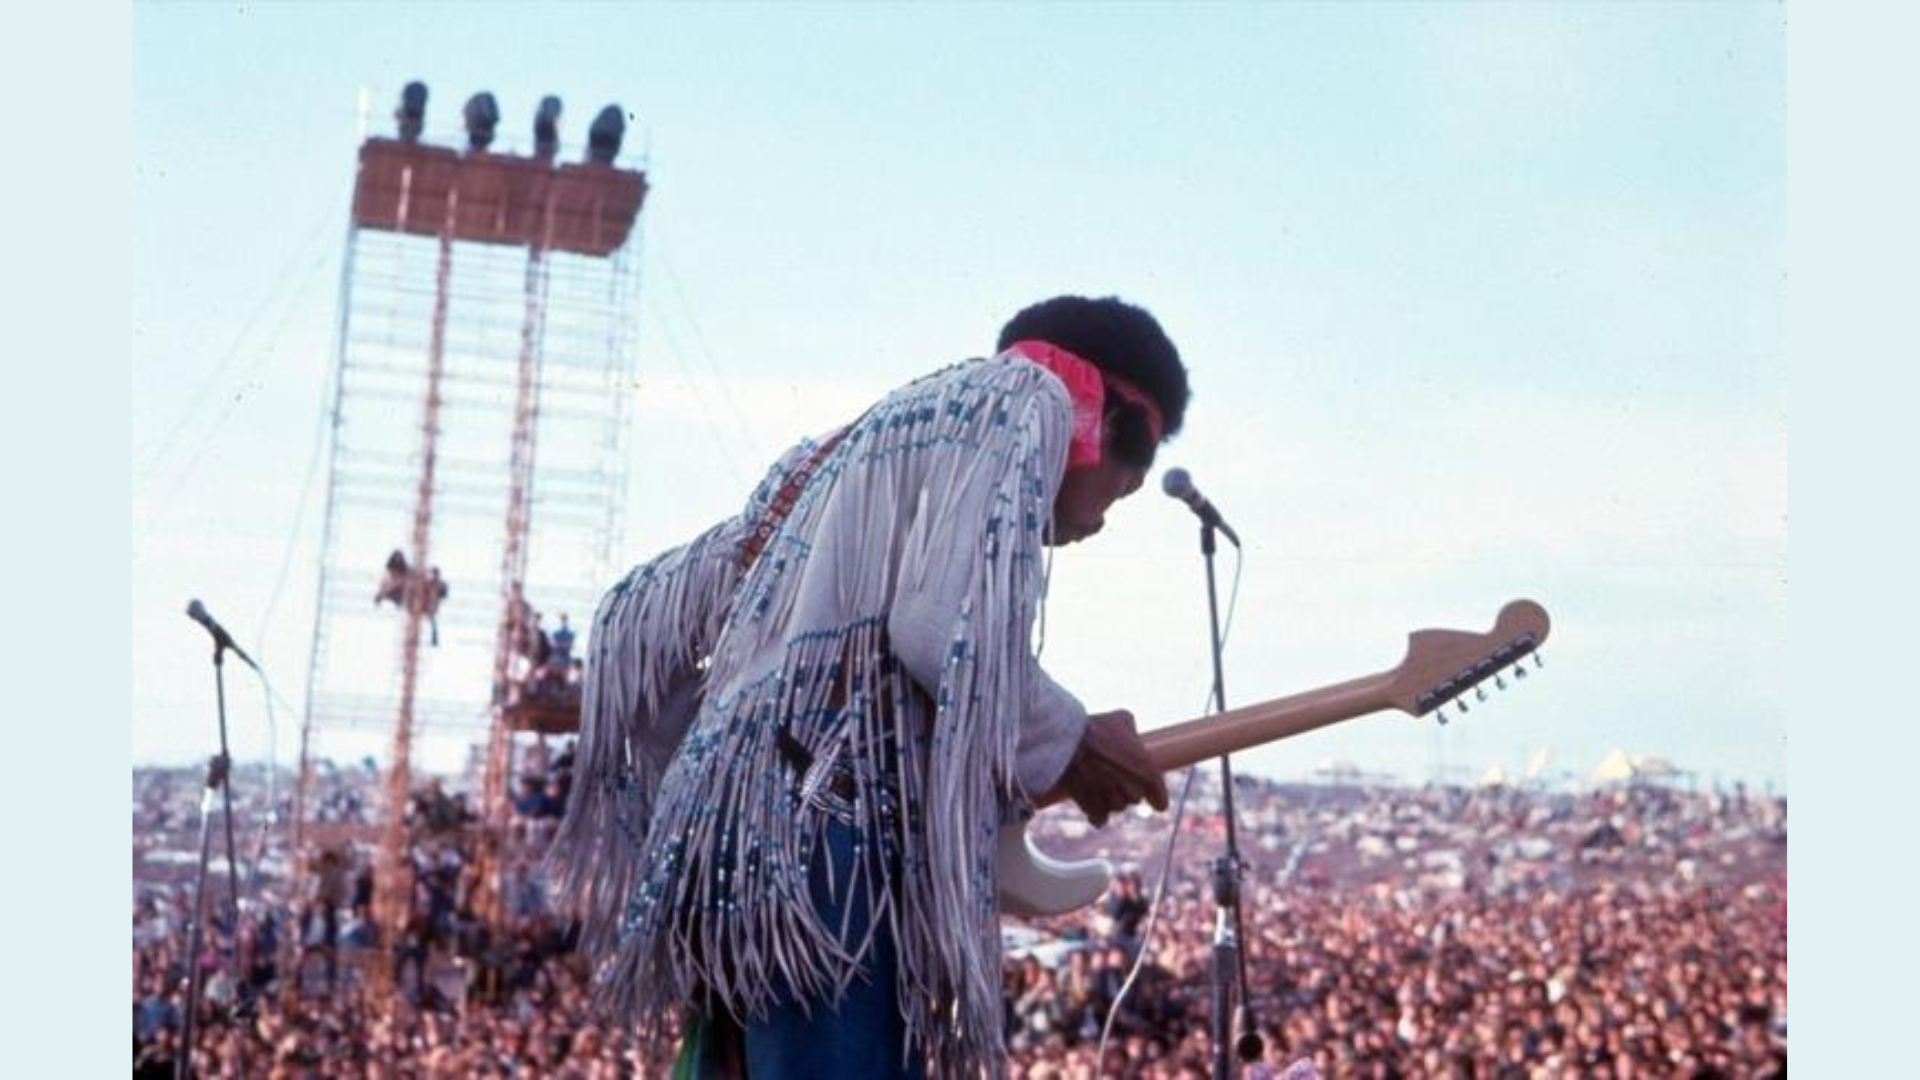 Jimi Hendrix performing at the Woodstock Festival, an experience coming soon to the Metaverse!